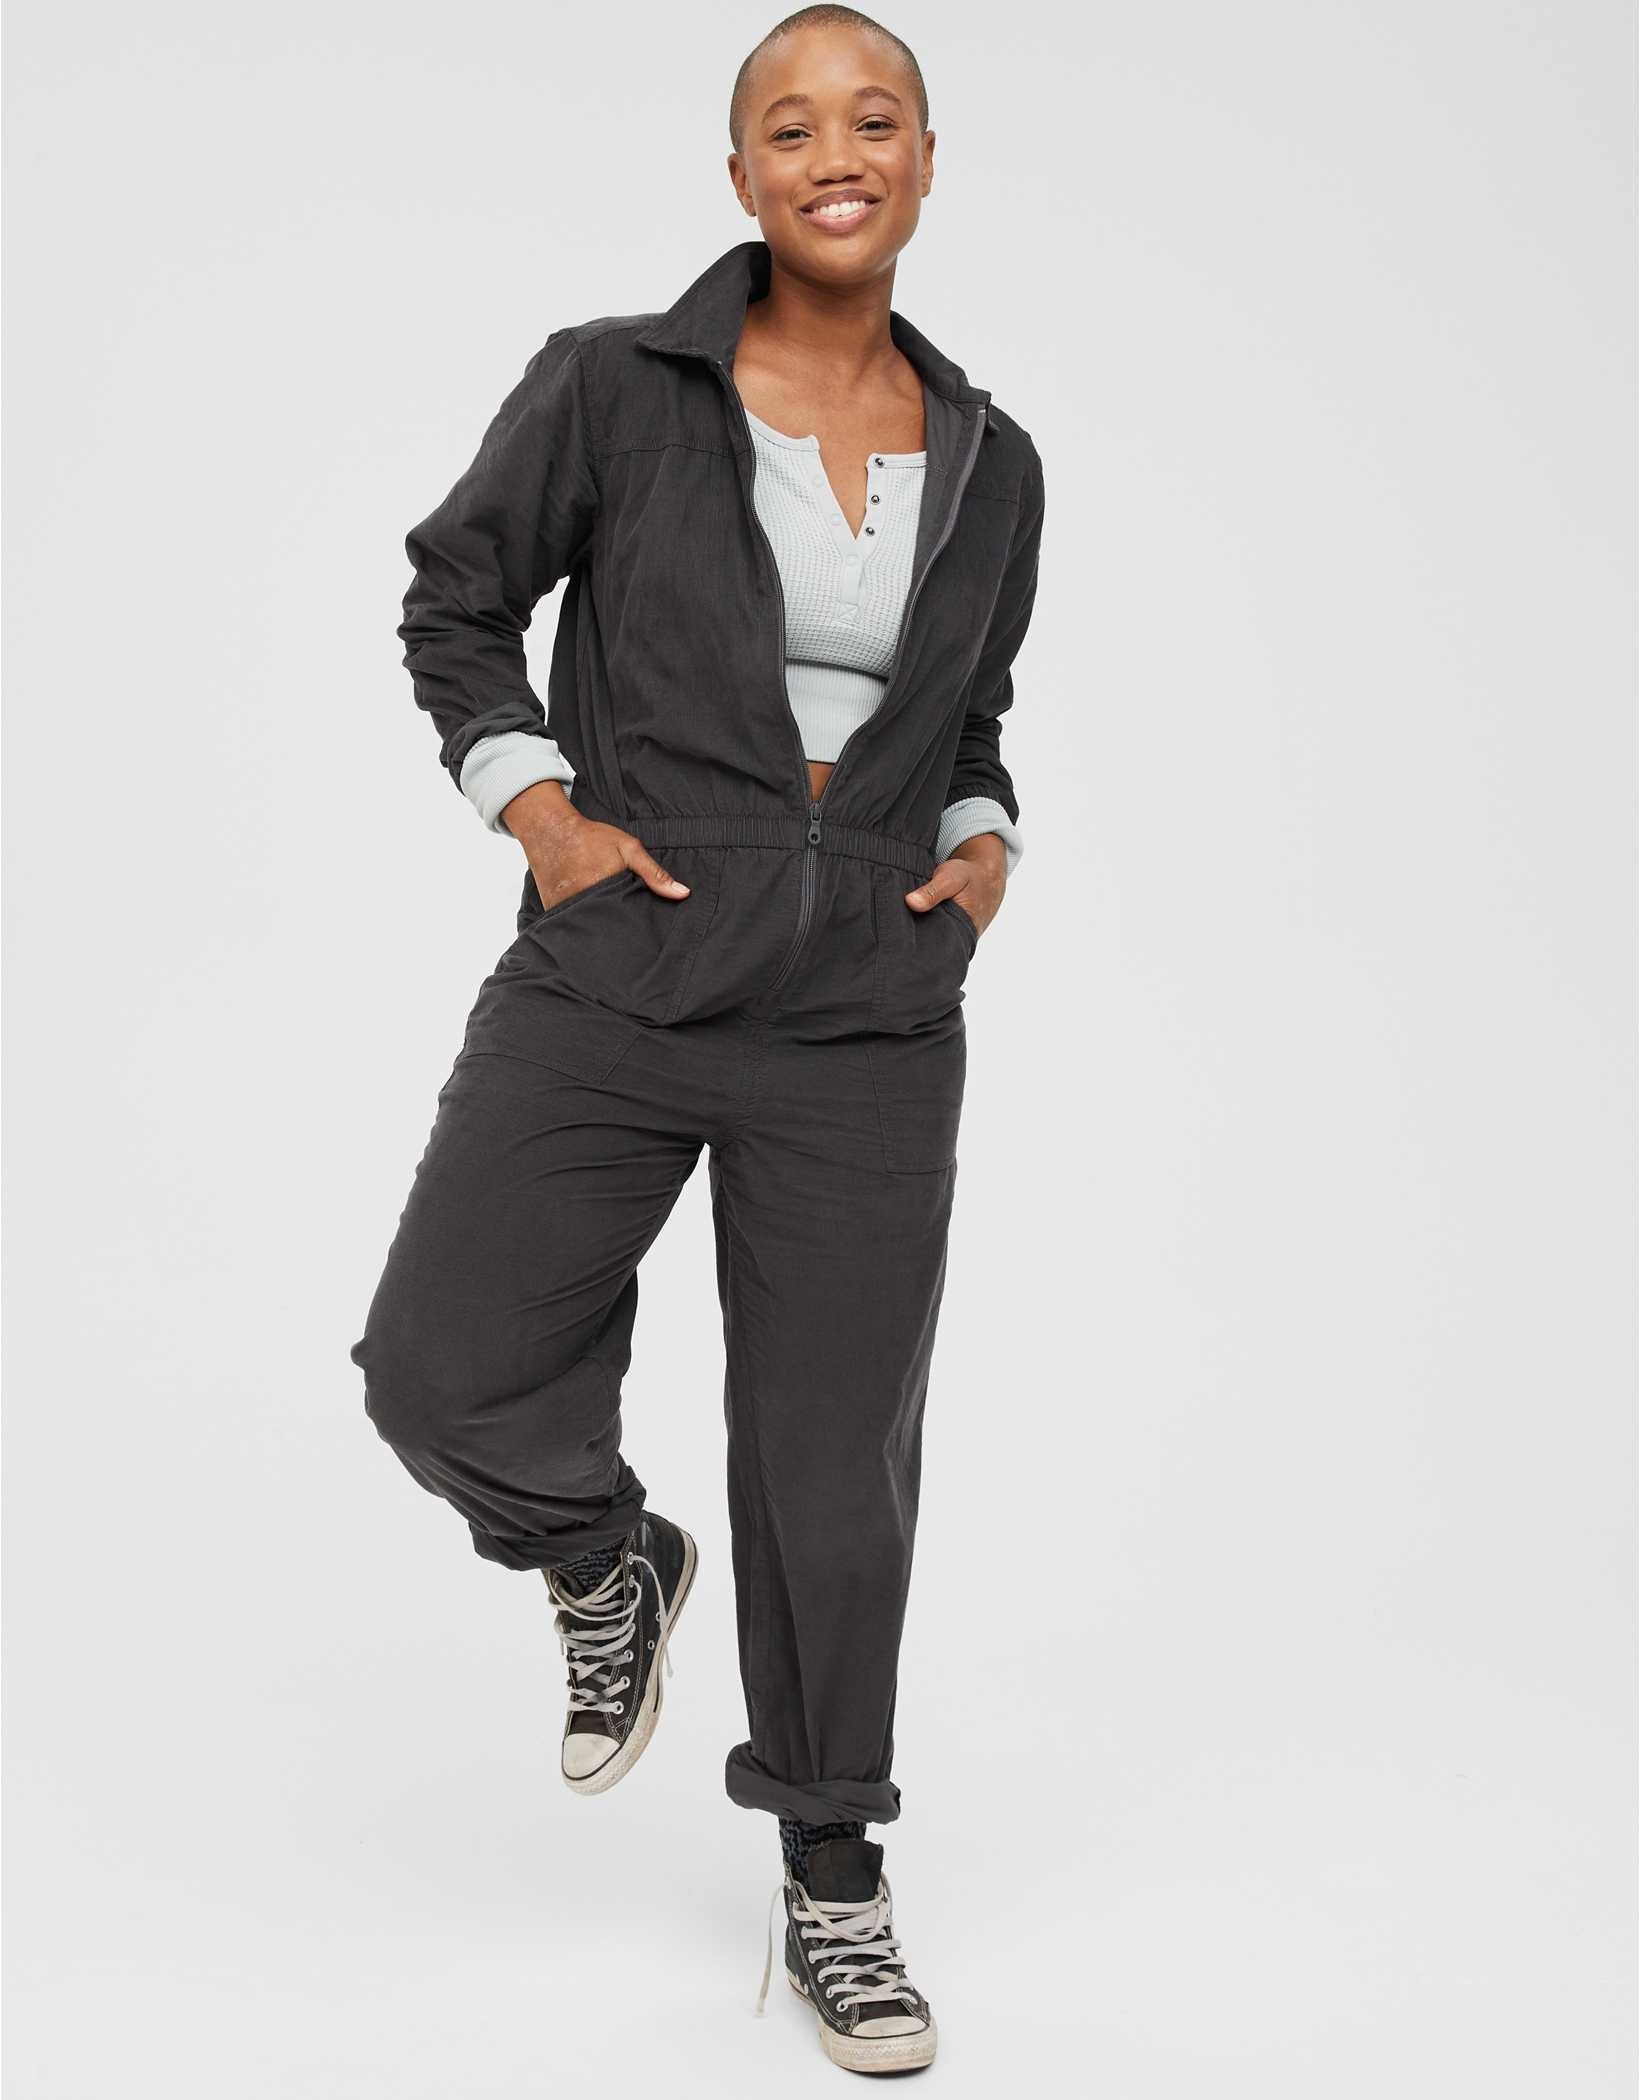 model wearing the jumpsuit in black with black converse and gray long sleeve top underneath